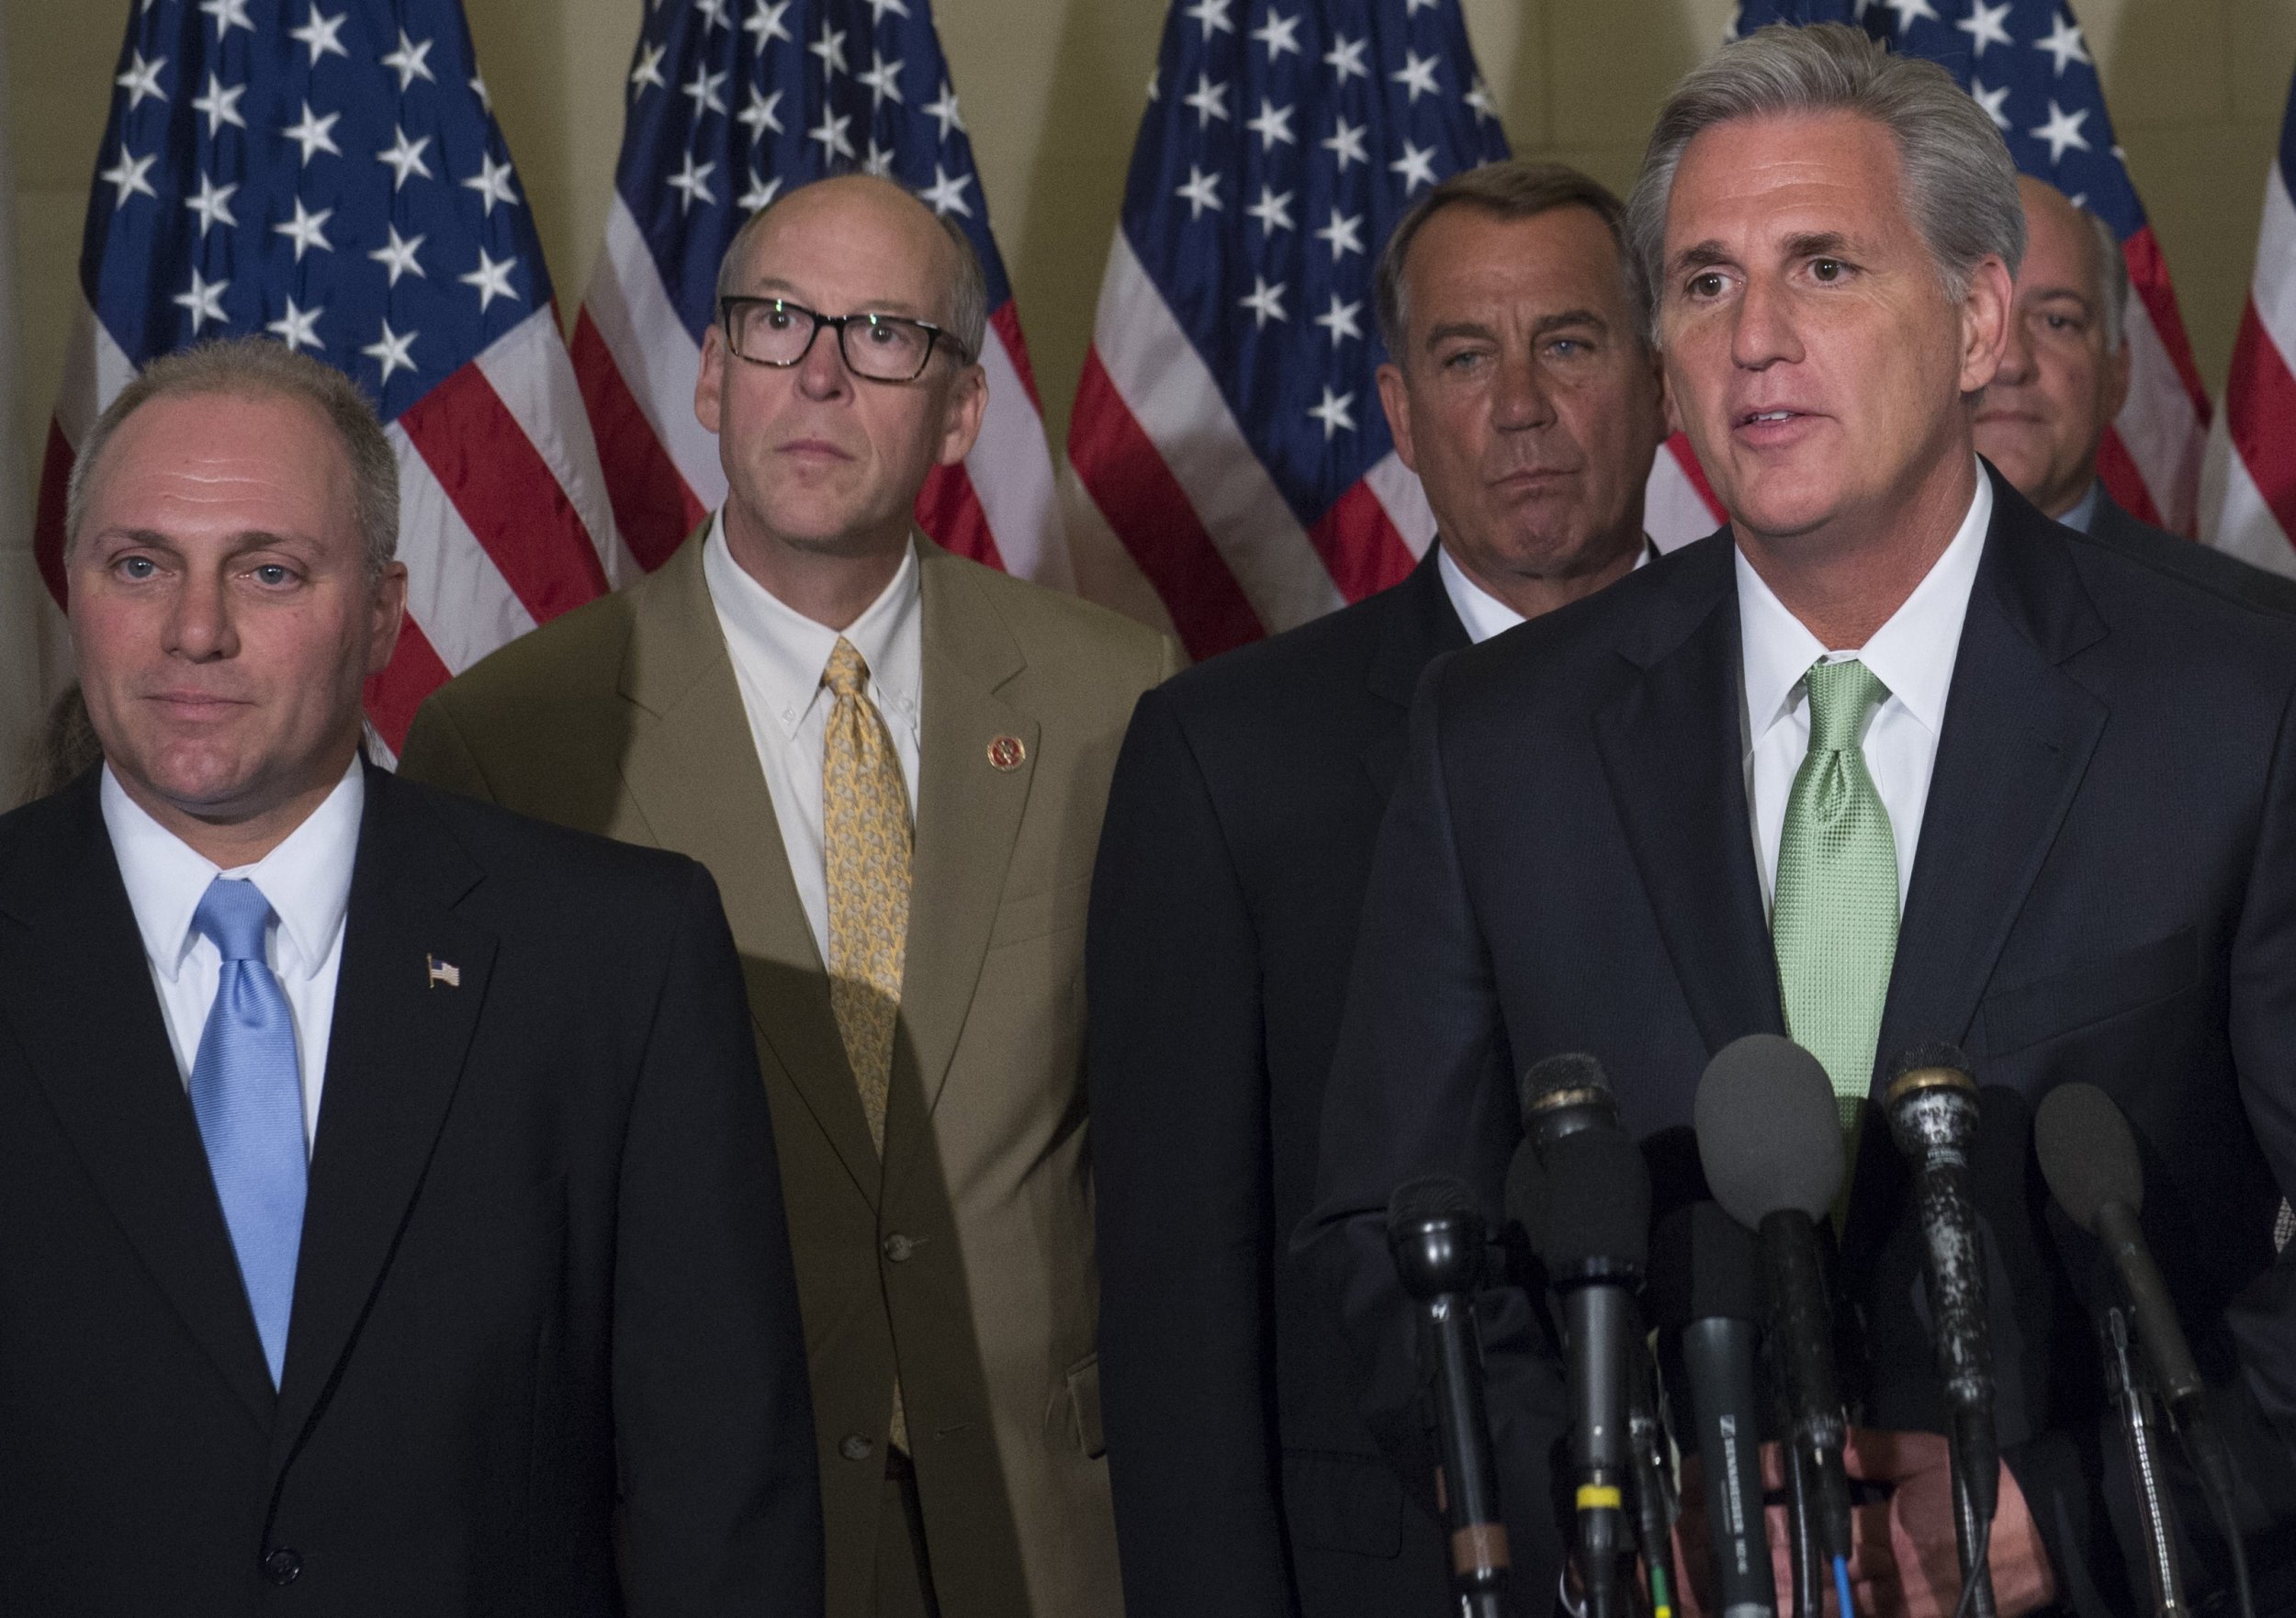 New Gop House Leaders Mccarthy Scalise Share One Thing In Common With Americans They Owe Money